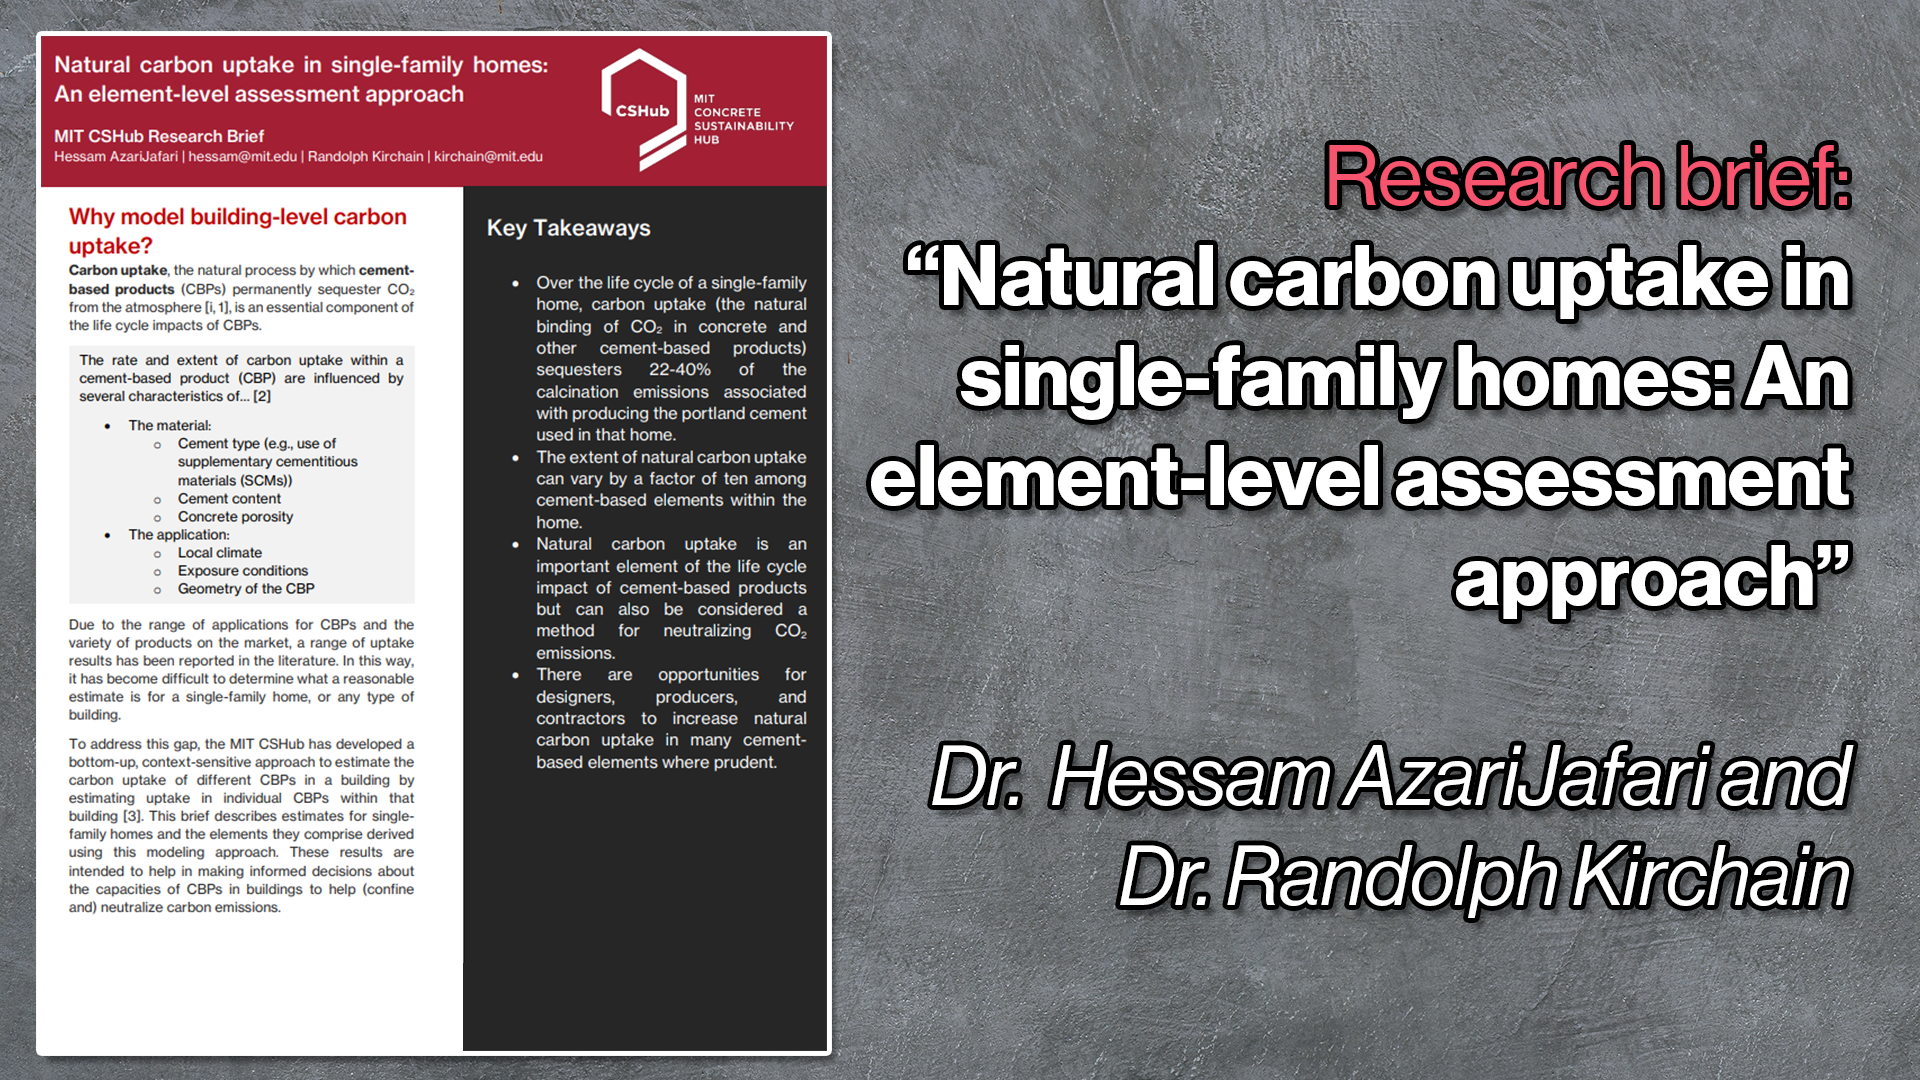 Brief: Natural carbon uptake in single-family homes: An element-level assessment approach